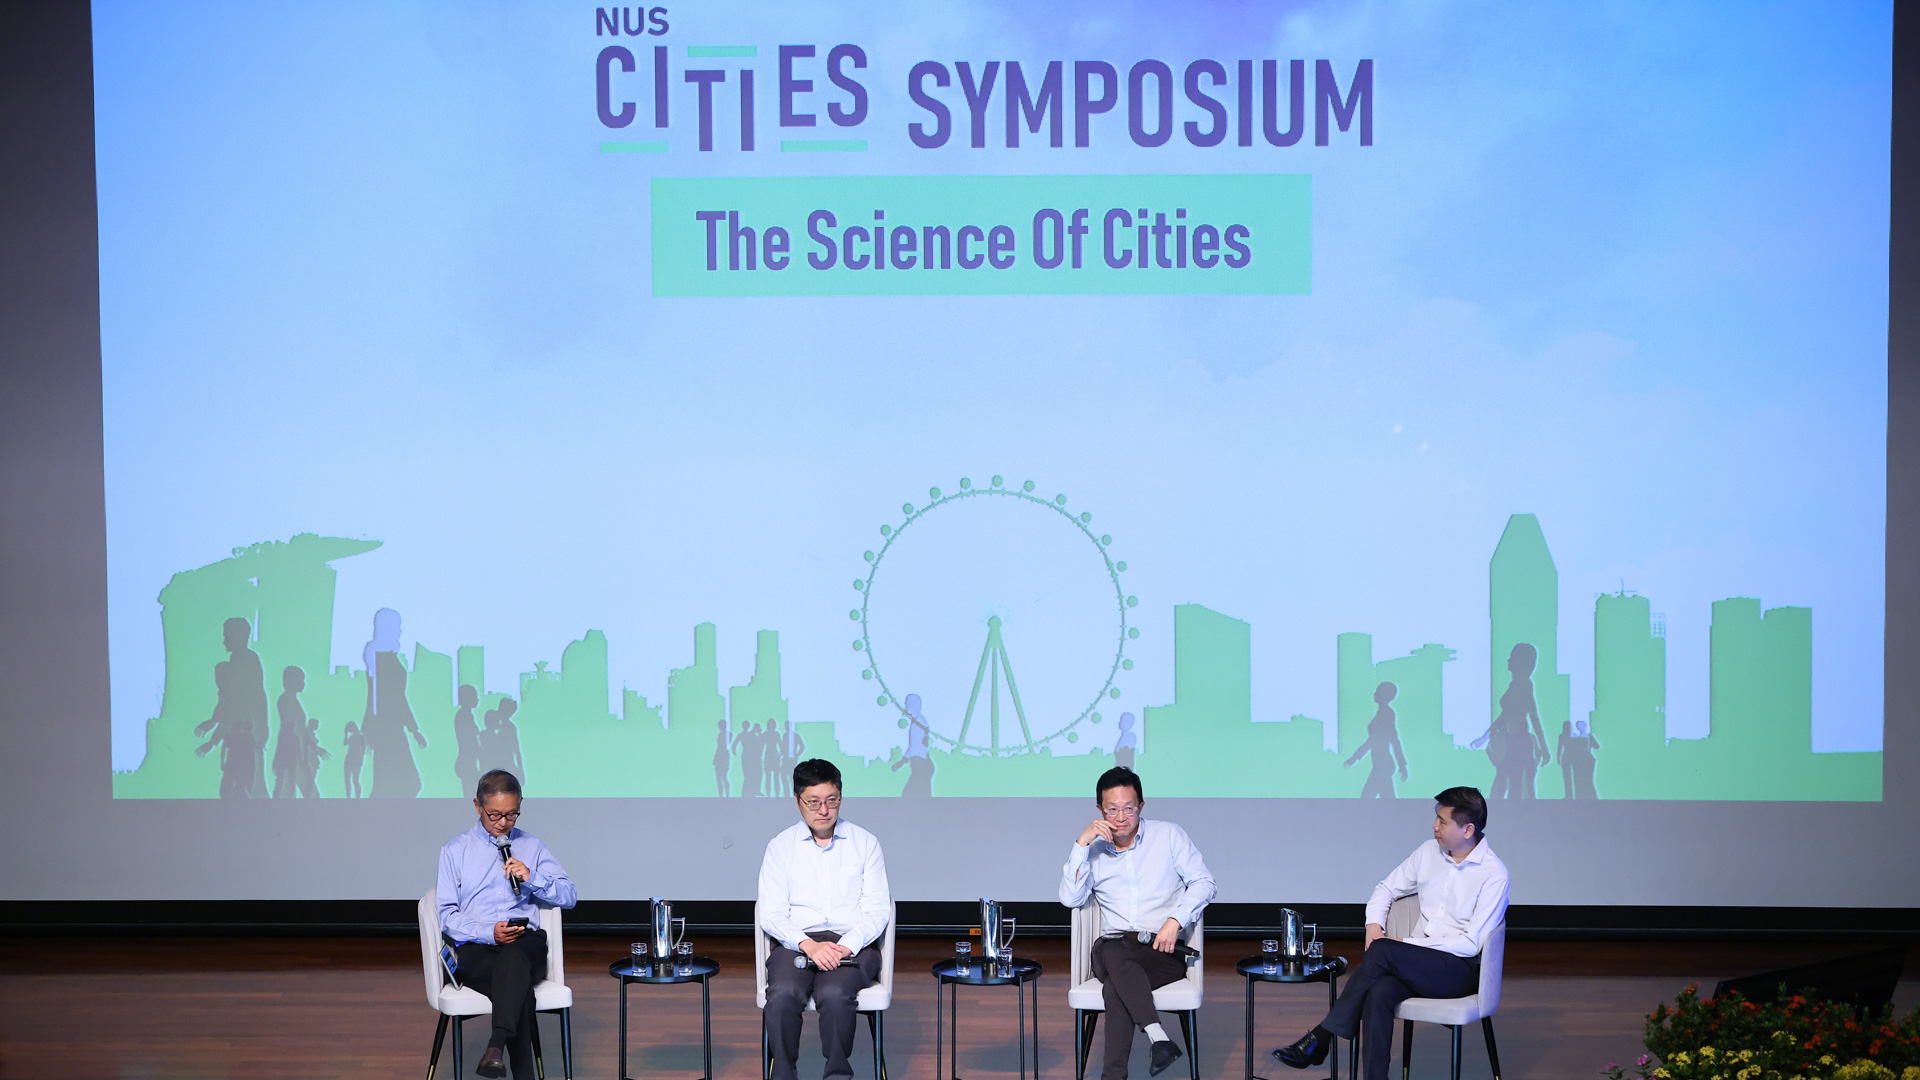 The Science of Cities brought together more than 40 speakers and panellists.